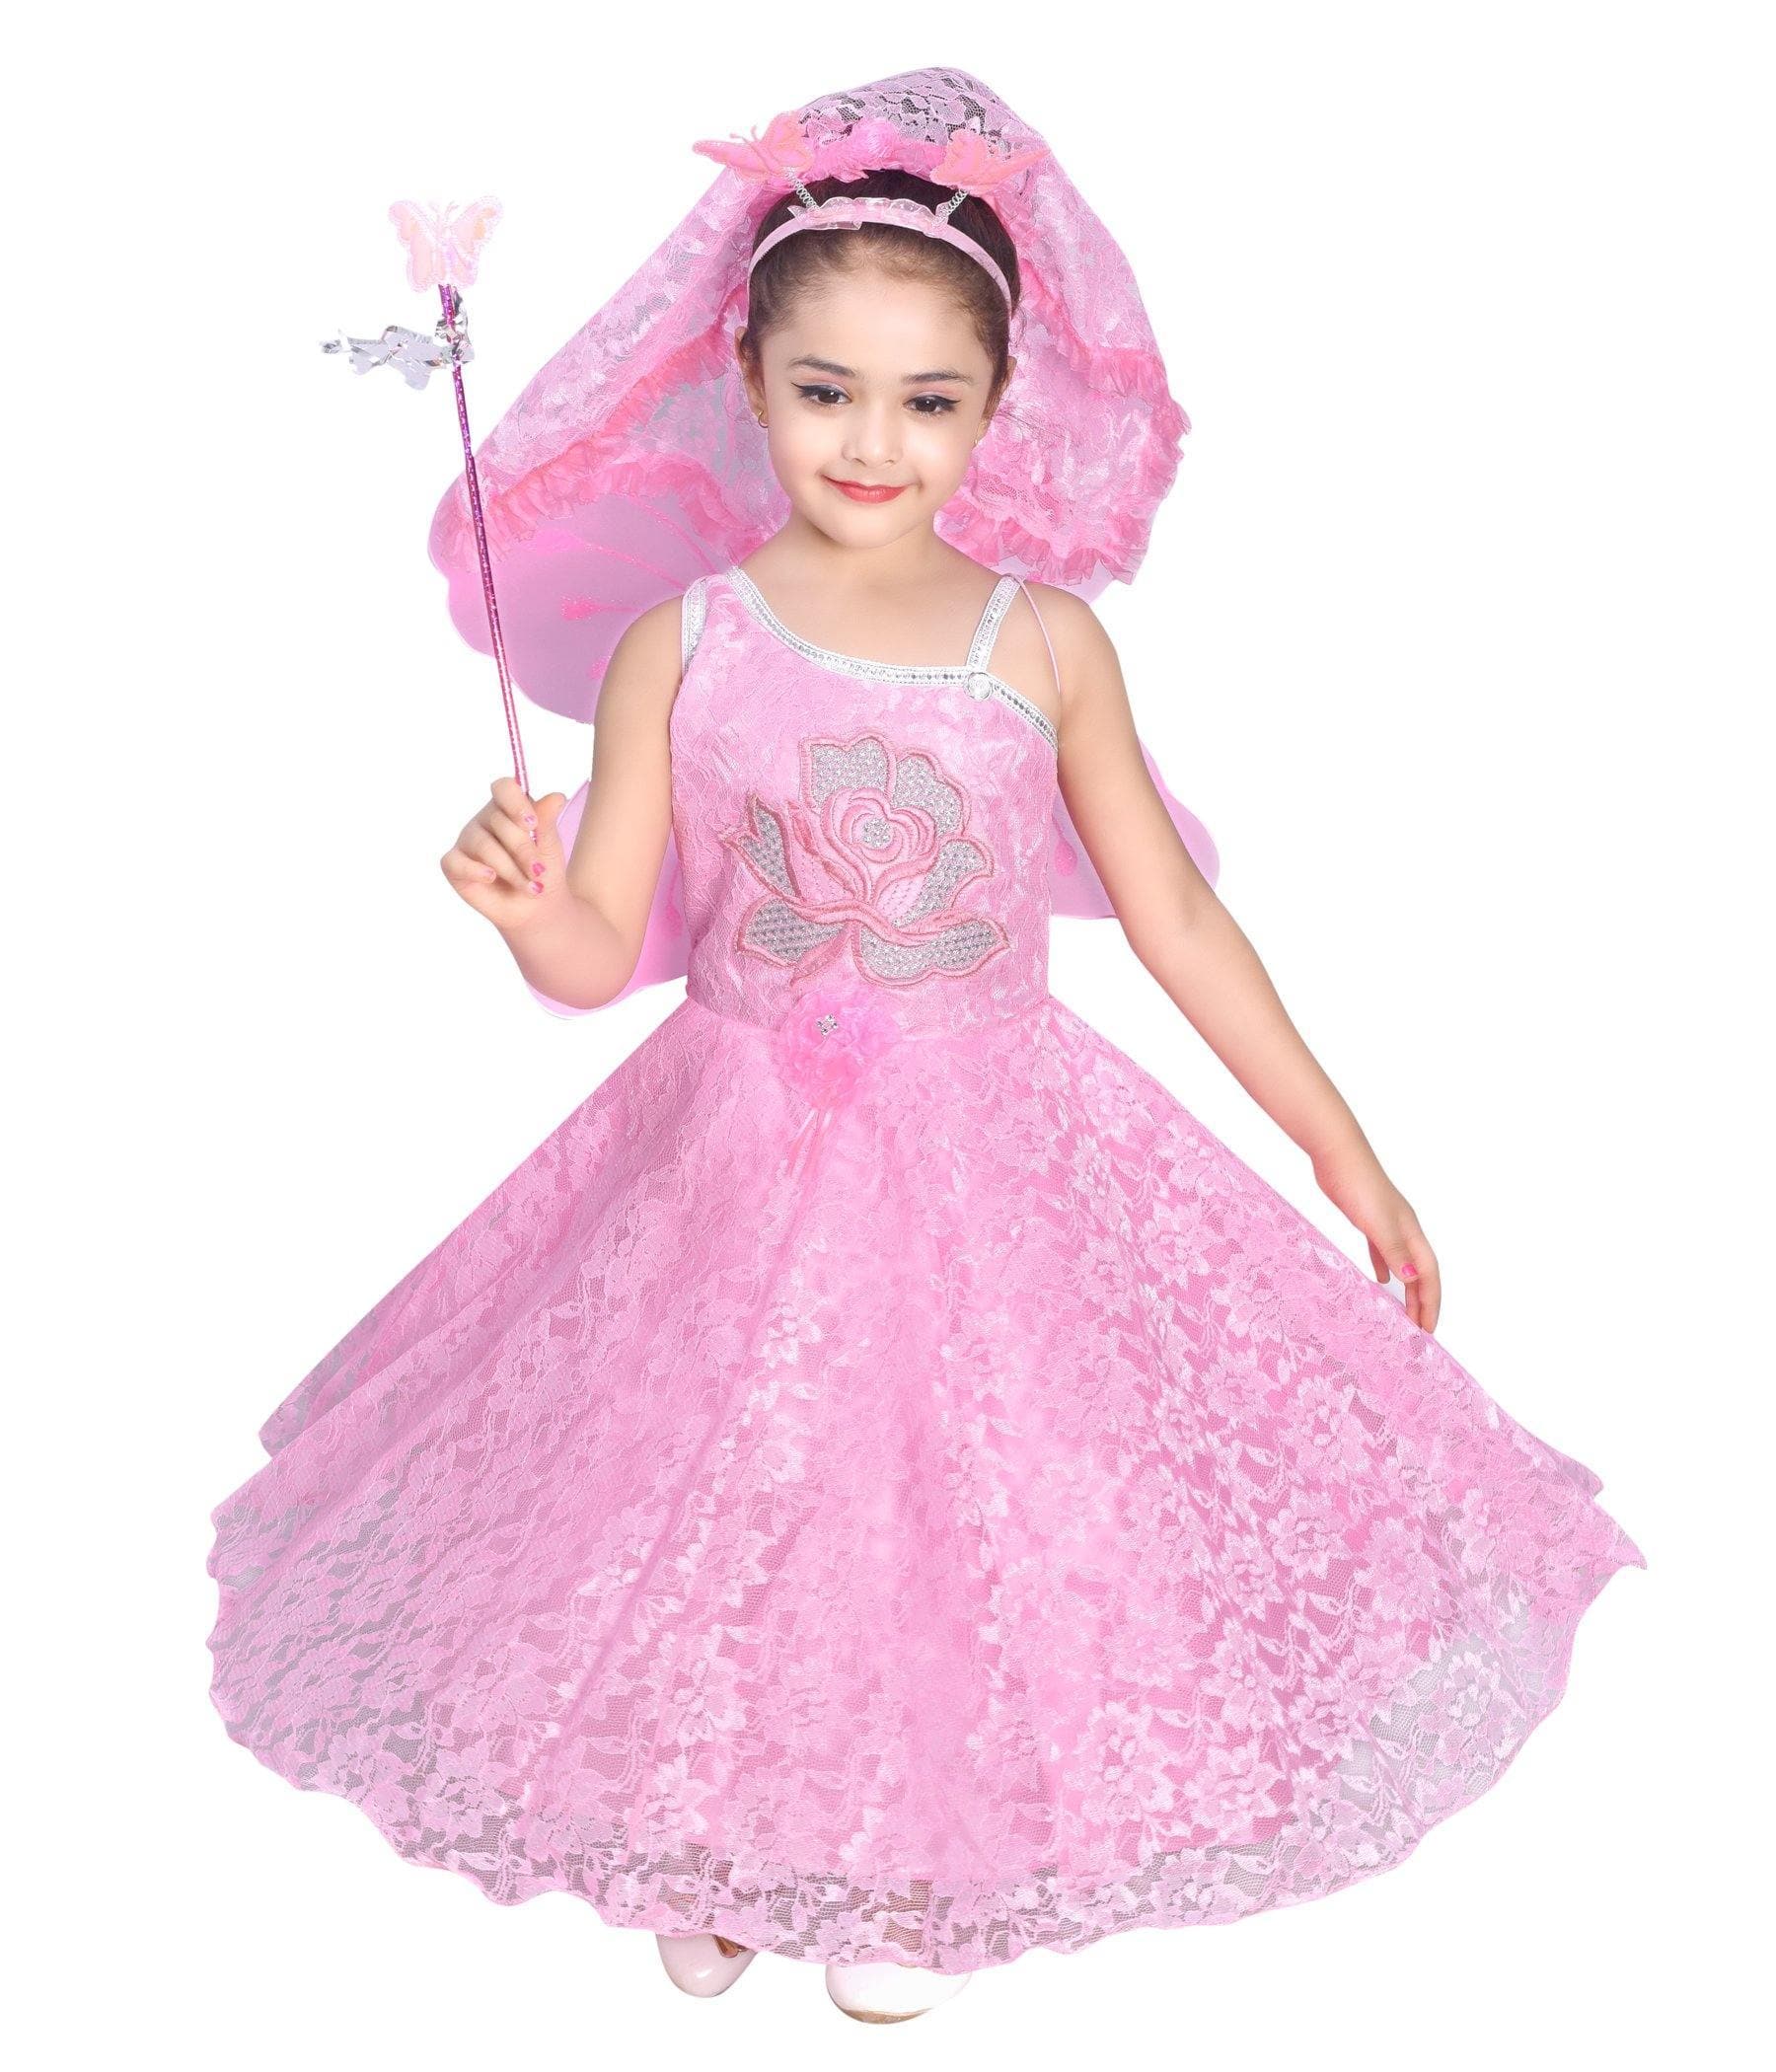 Let your little girl be a princess every day in our beautiful dresses from  @marinela.kids 🤍 #marinelakids | Instagram